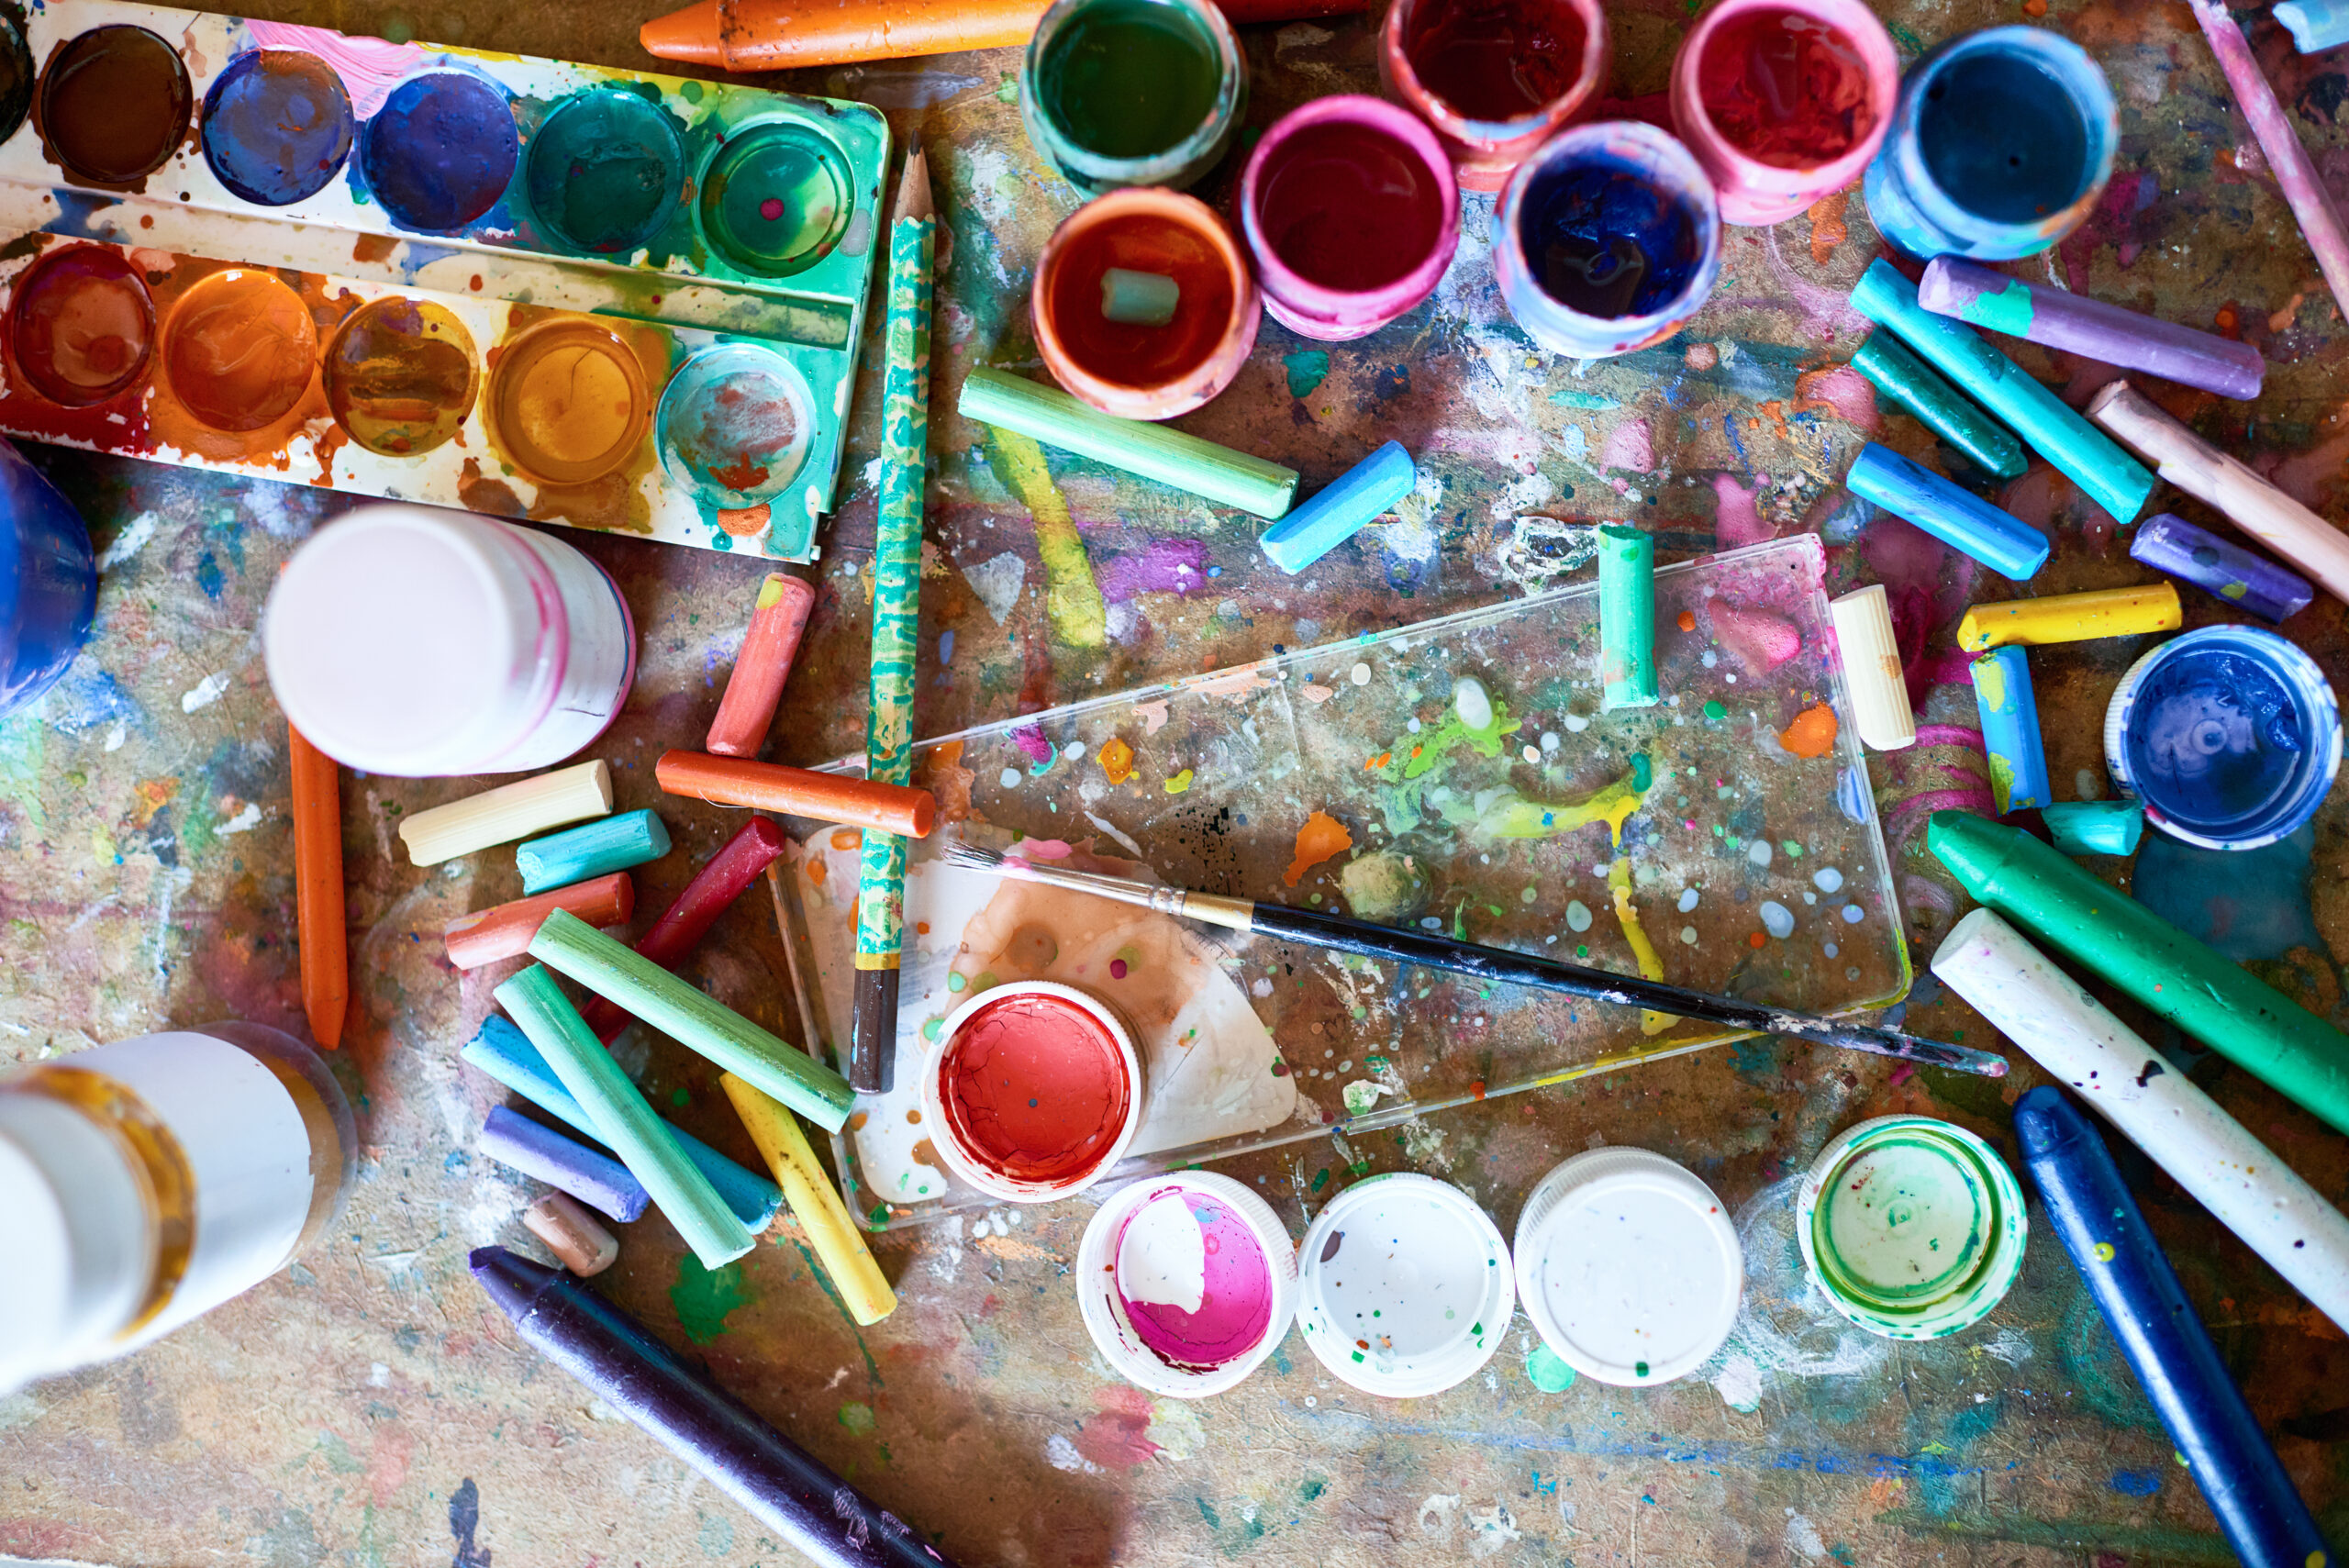 Background image of painting supplies on shabby wooden table: paintbrushes, pastels and watercolors splashed with paints